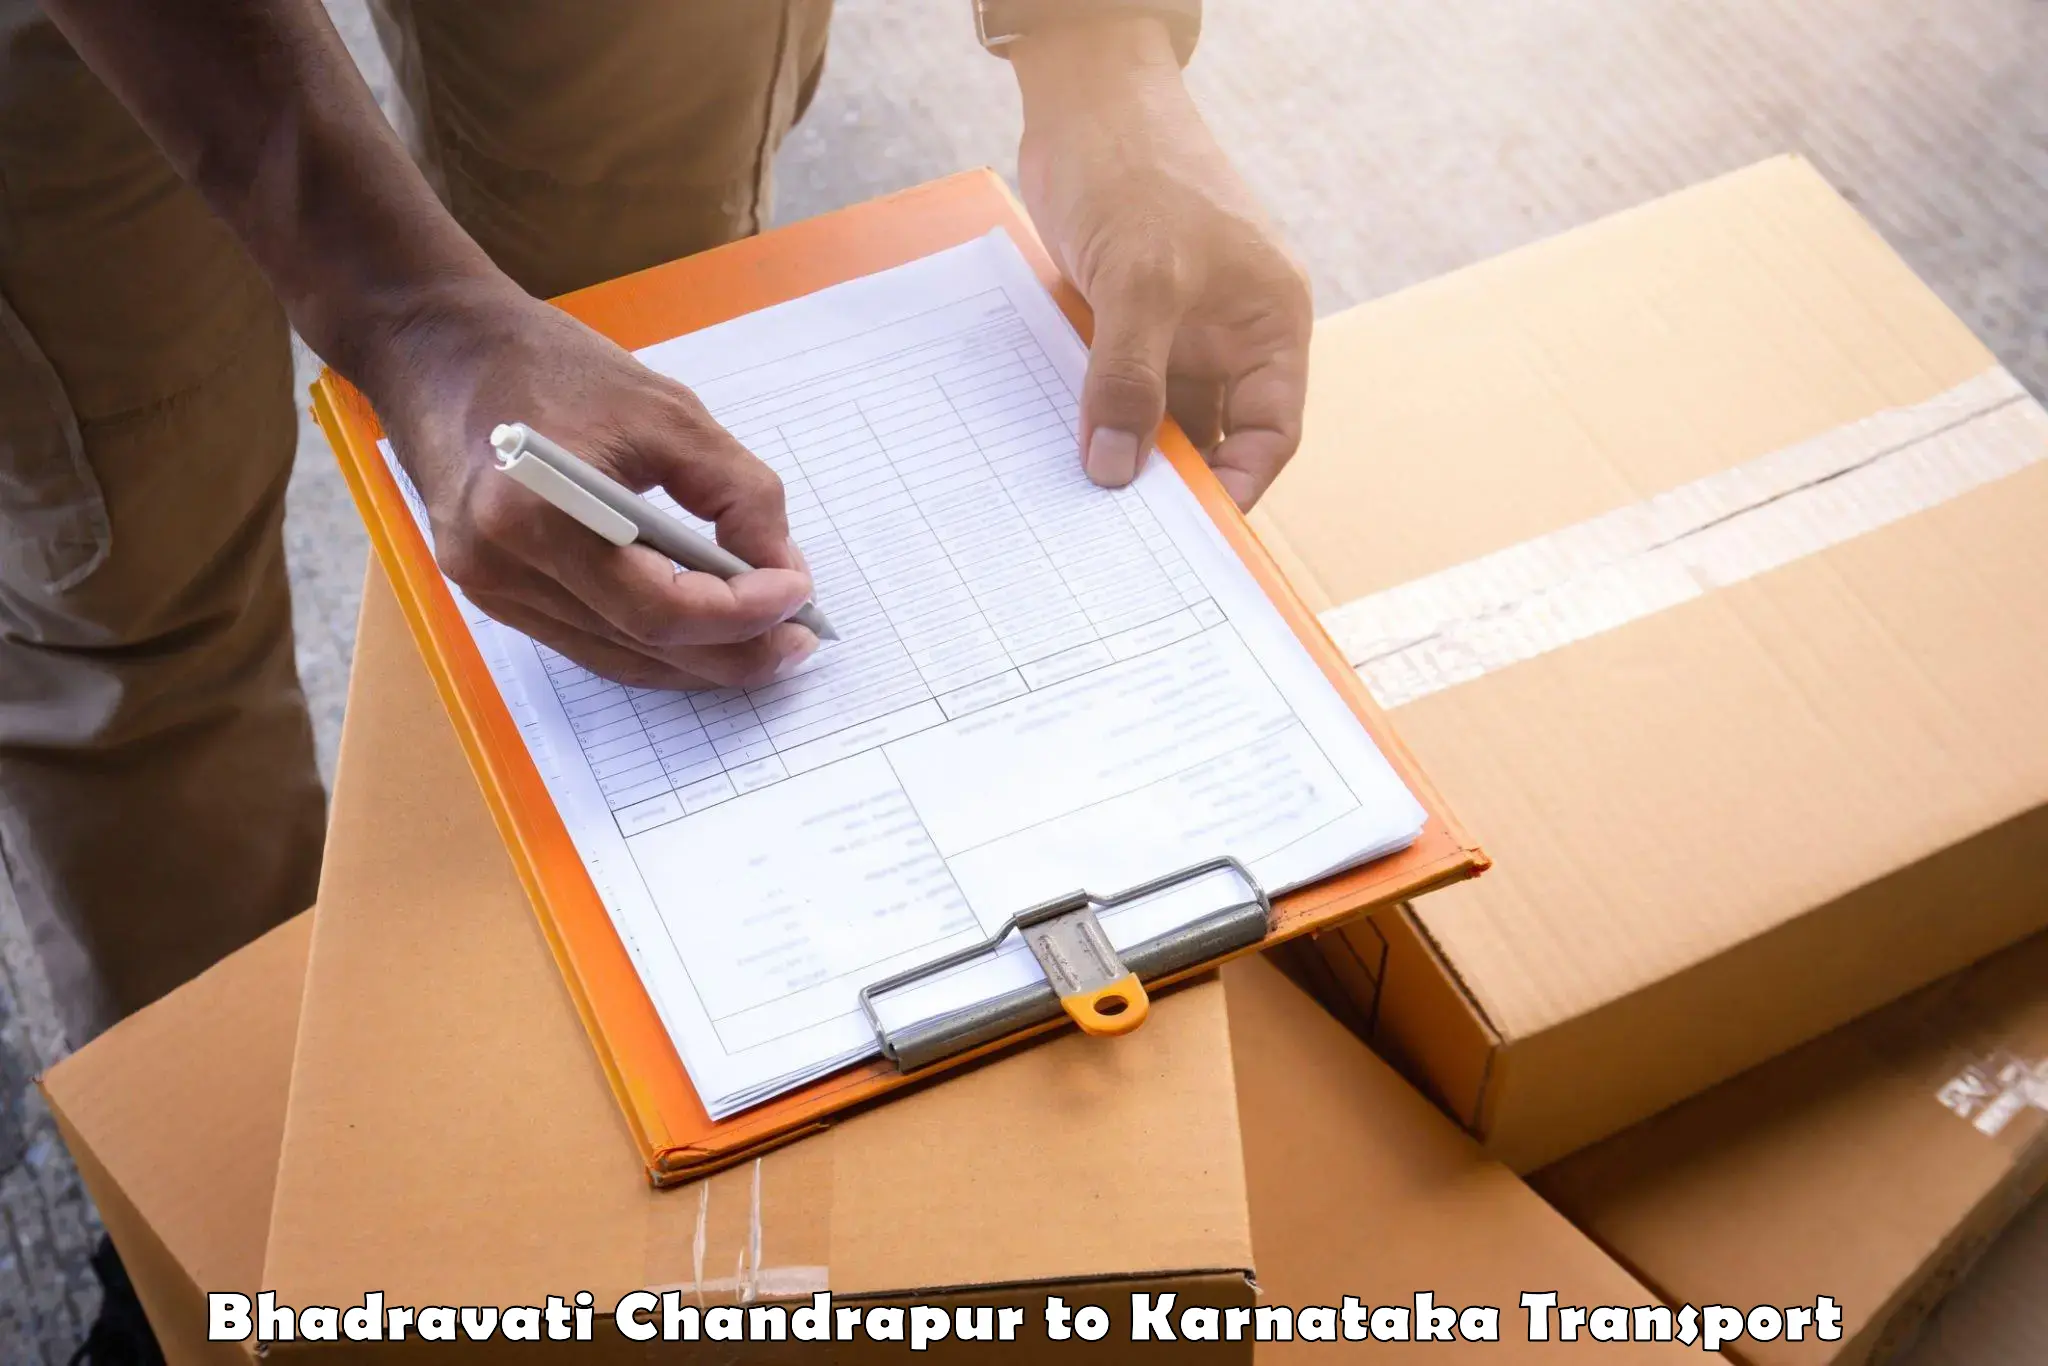 Package delivery services in Bhadravati Chandrapur to Ramanathapura